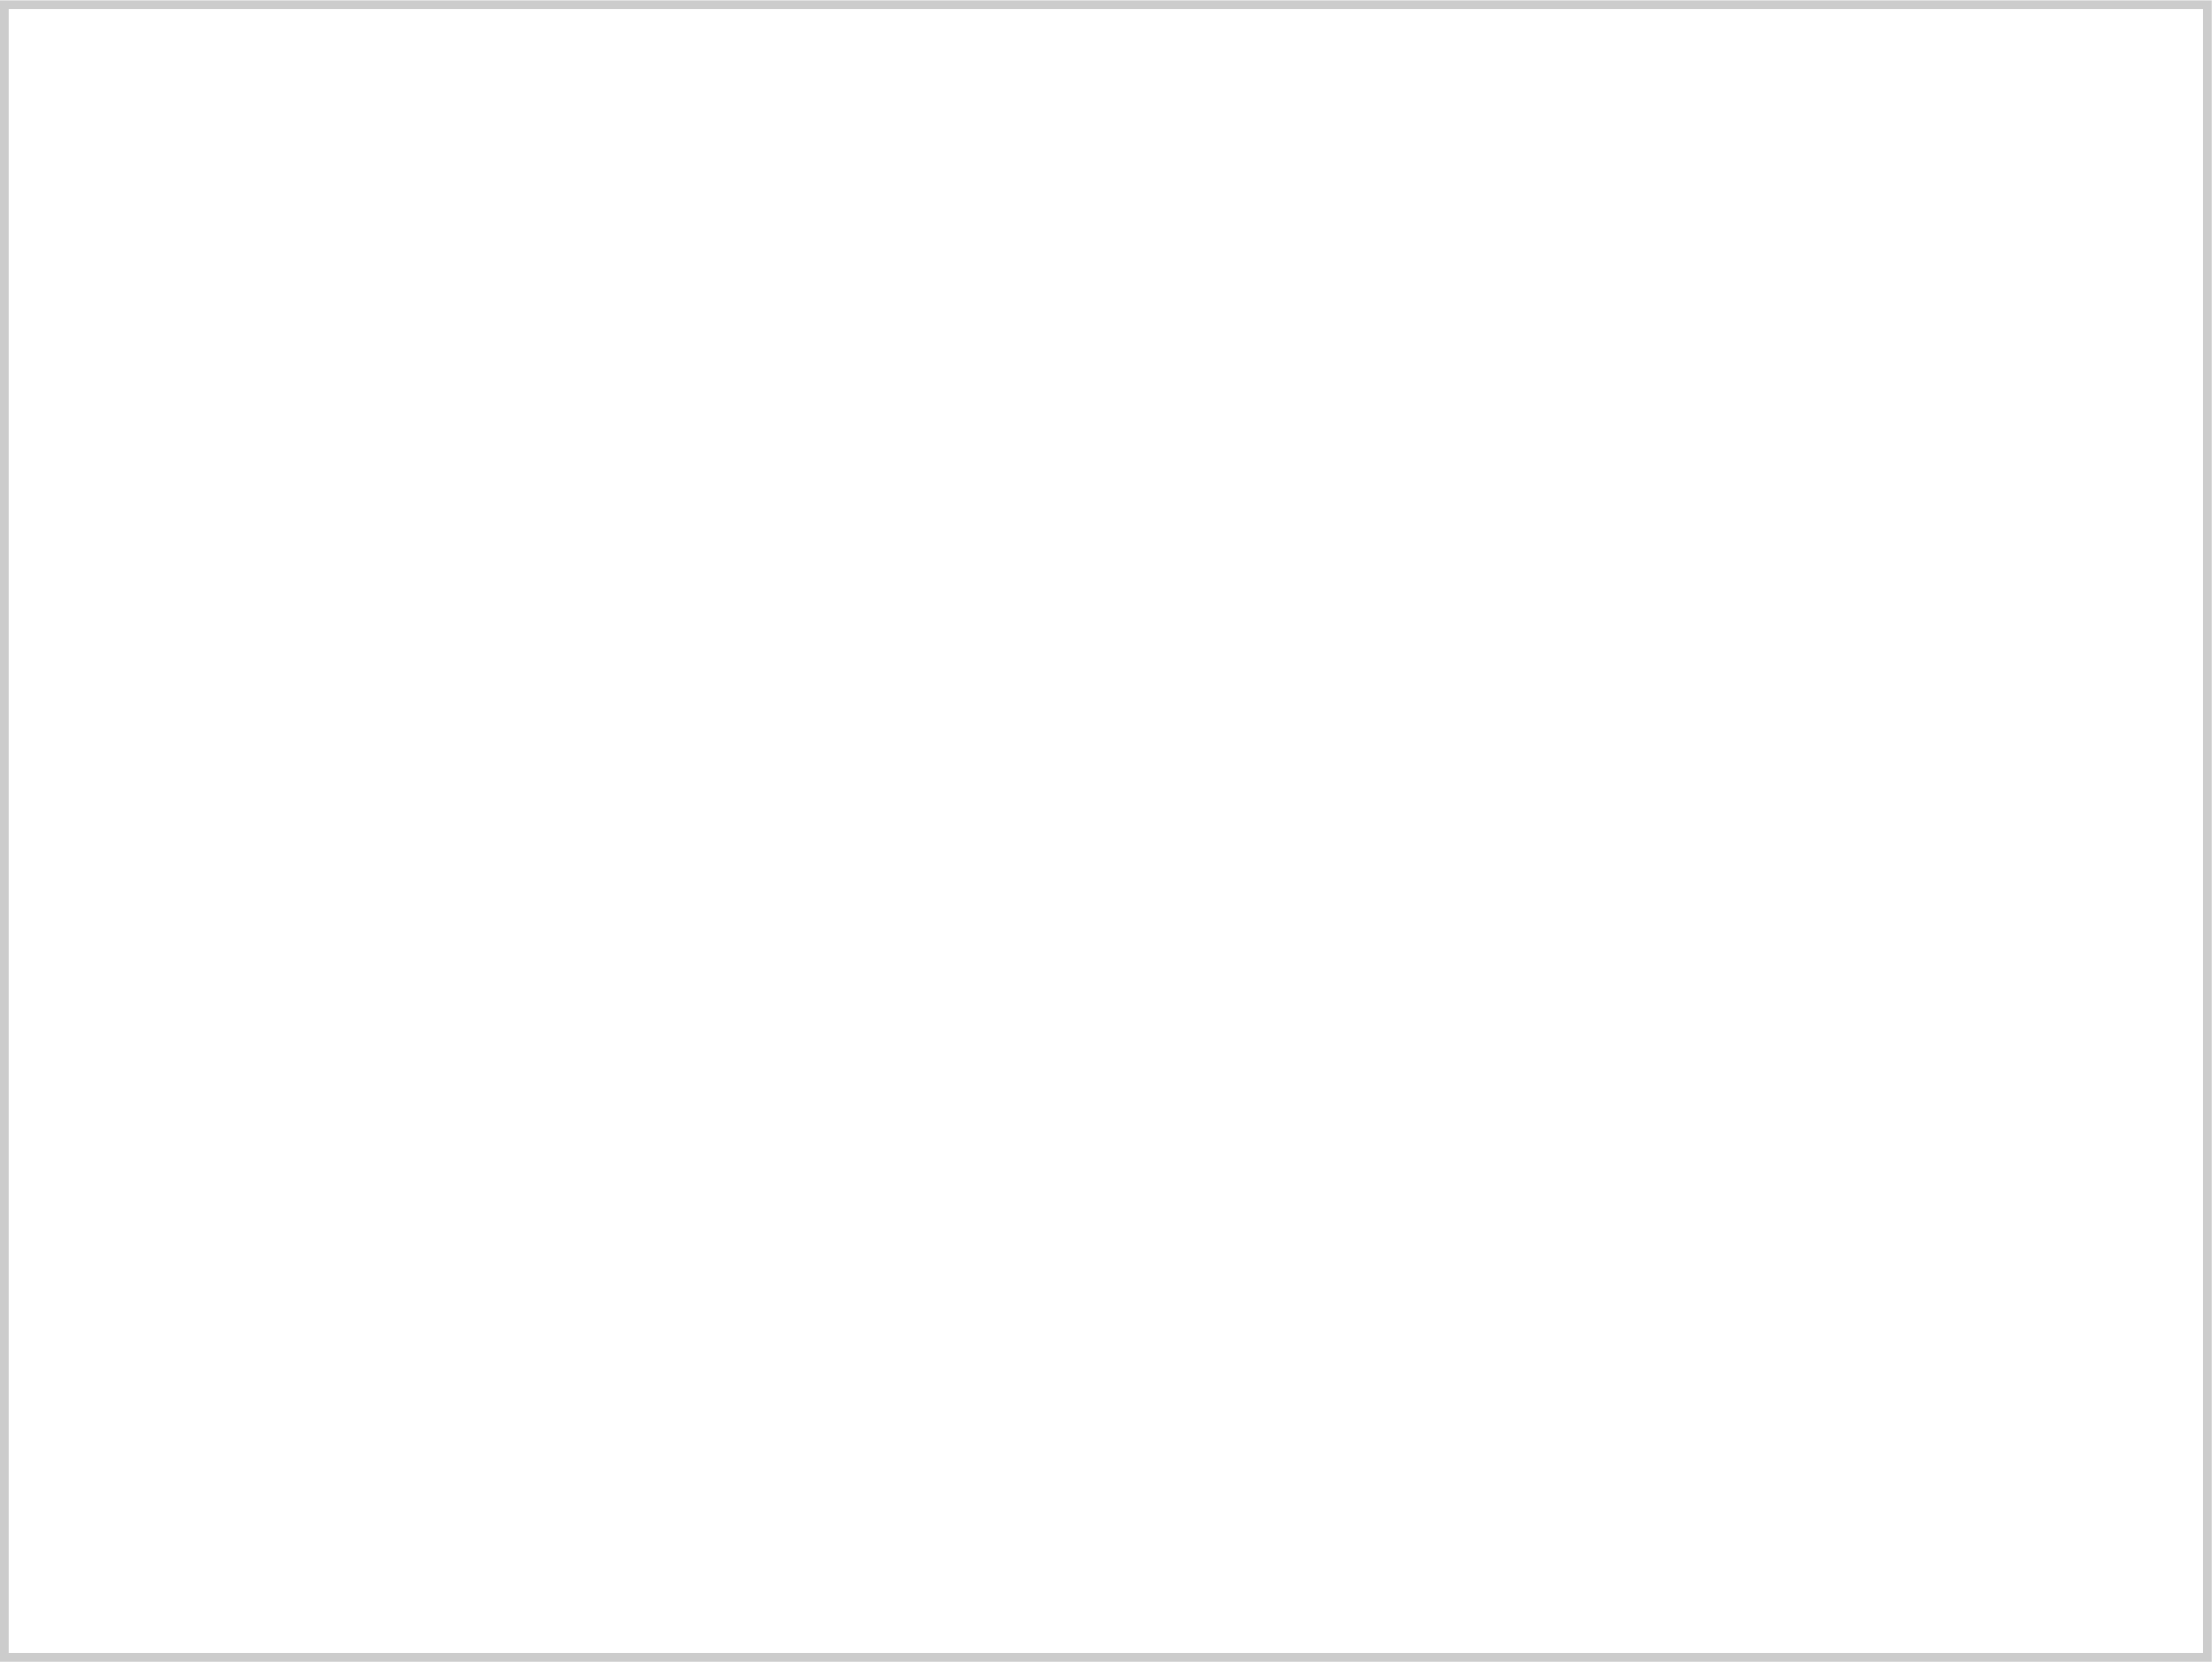 Bombshell client for web design, web development, copywriting, sales material, content writing, and brand strategy consulting, Iglu Network Ltd.